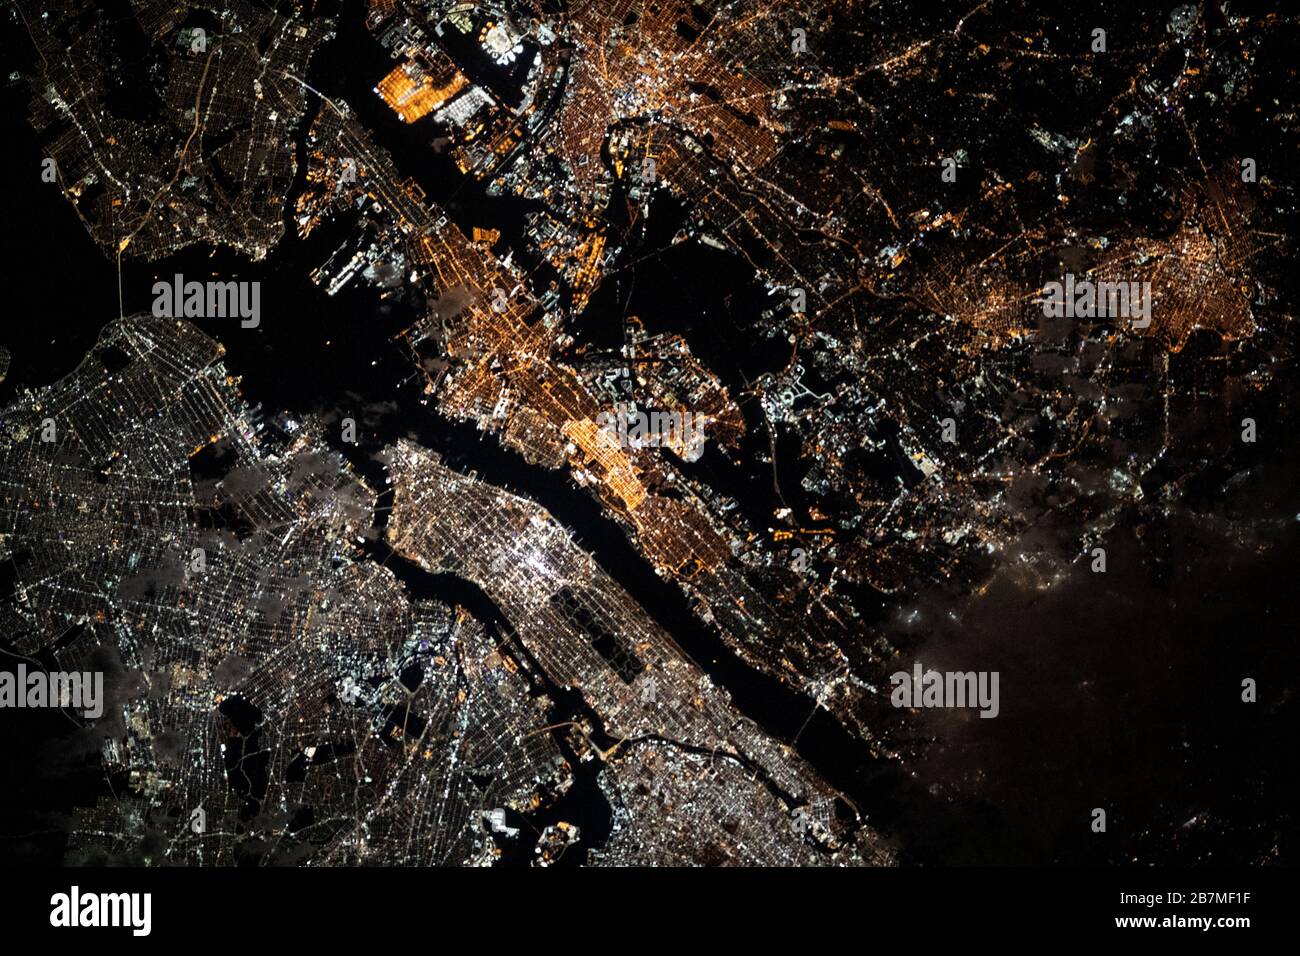 NEW YORK, USA - 28 Feb 2020 - The well-lit New York and New Jersey metropolitan area is viewed during the early morning hours as the International Spa Stock Photo